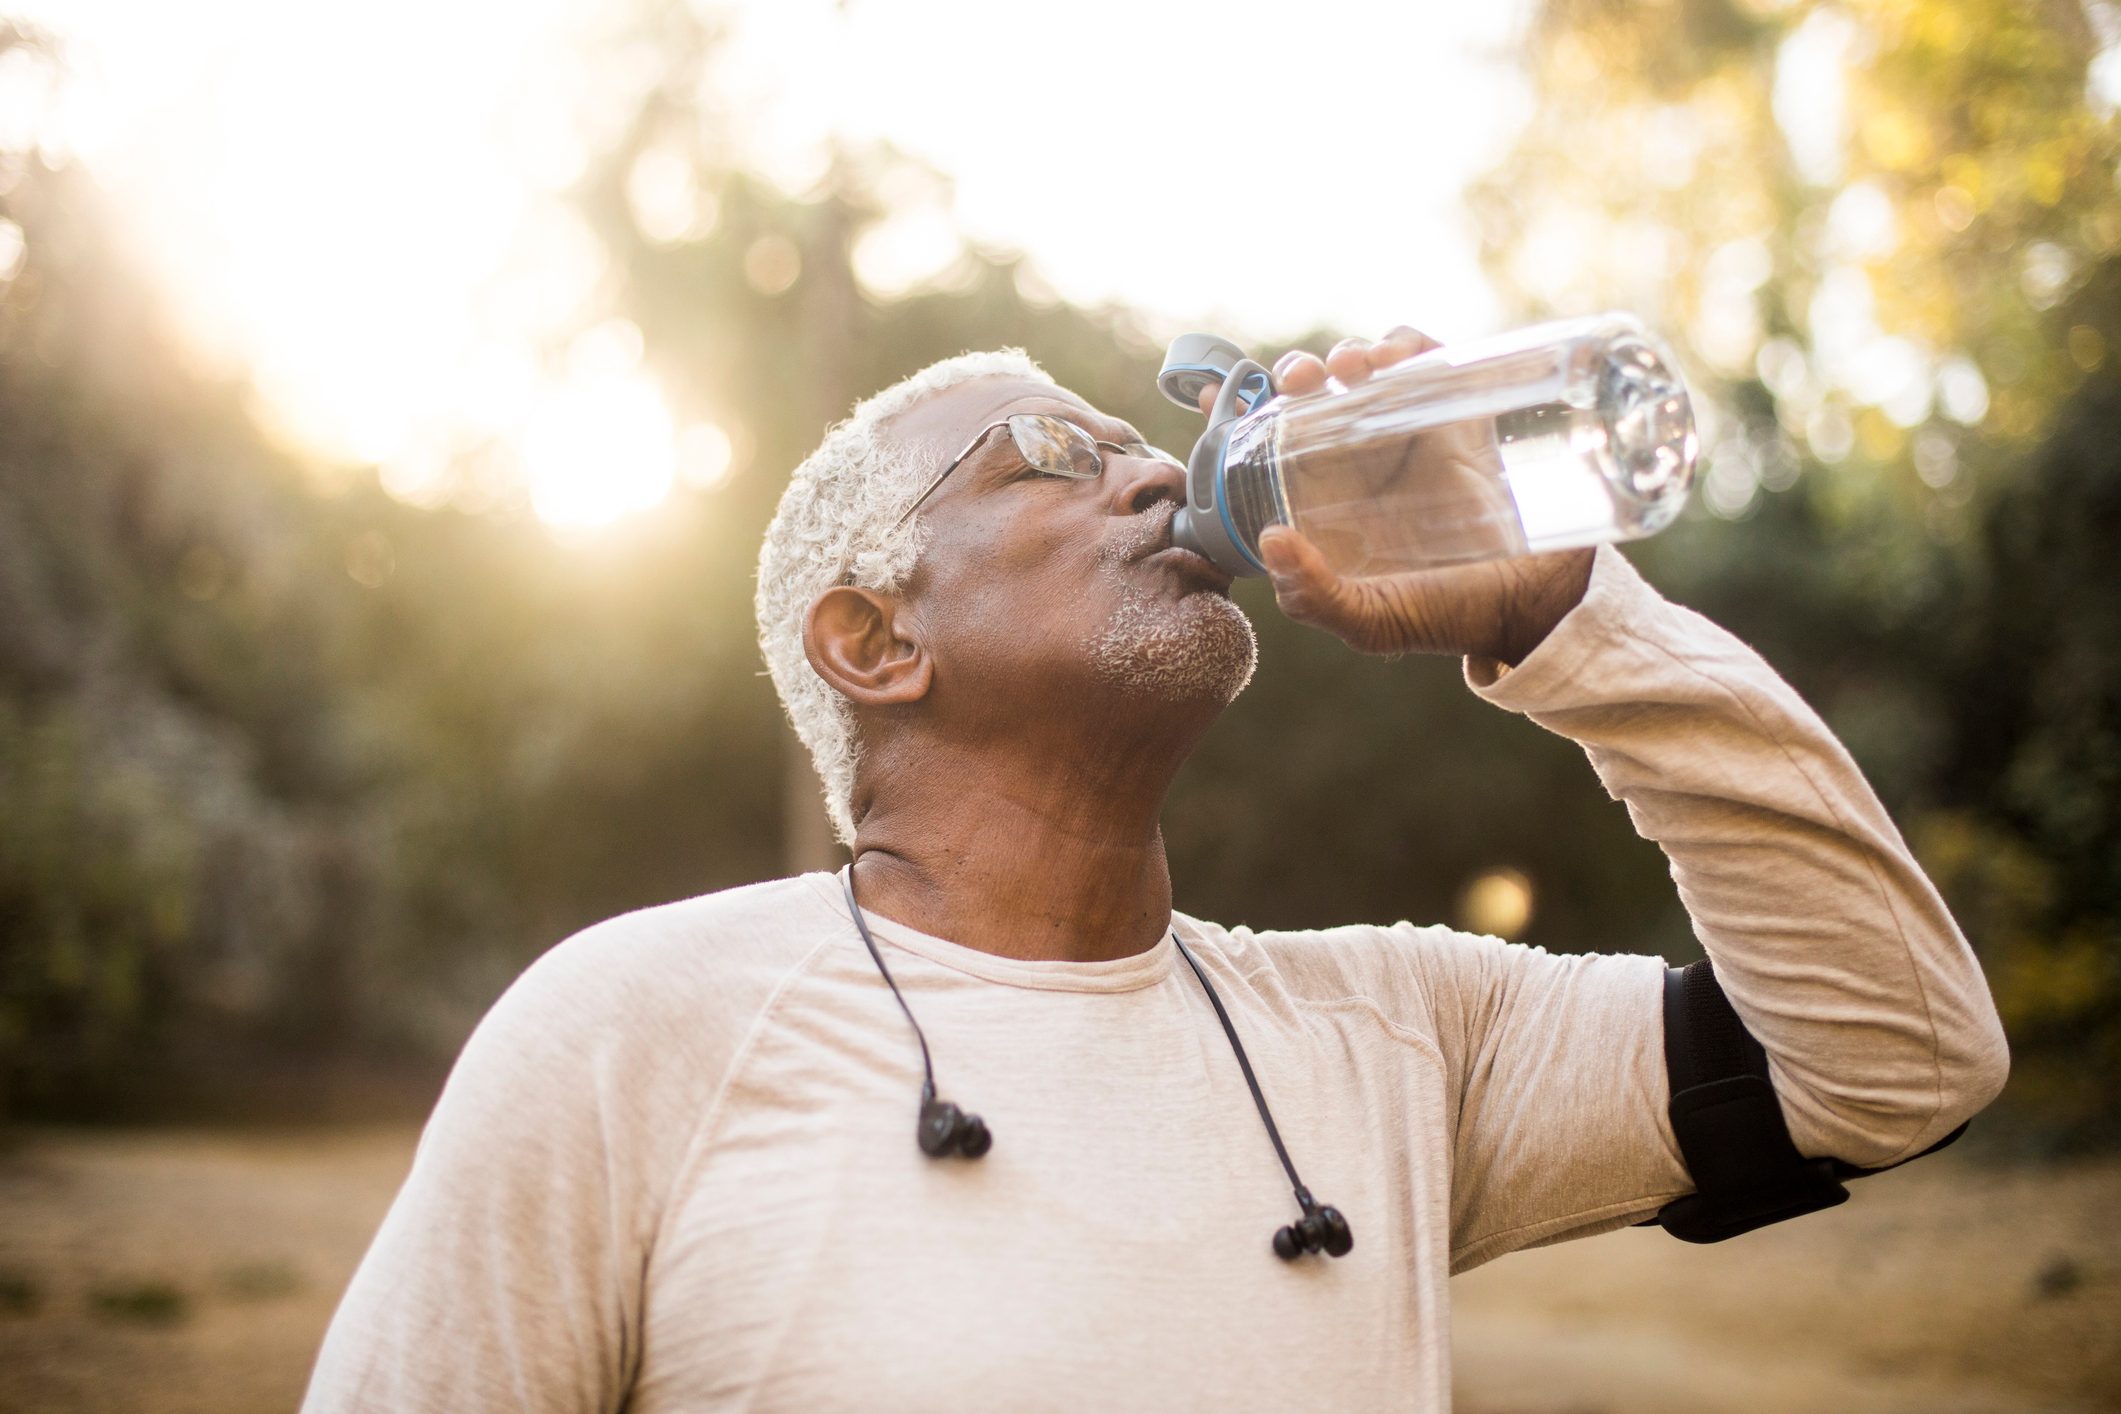 Can Dehydration Cause High Blood Pressure? What Experts Say